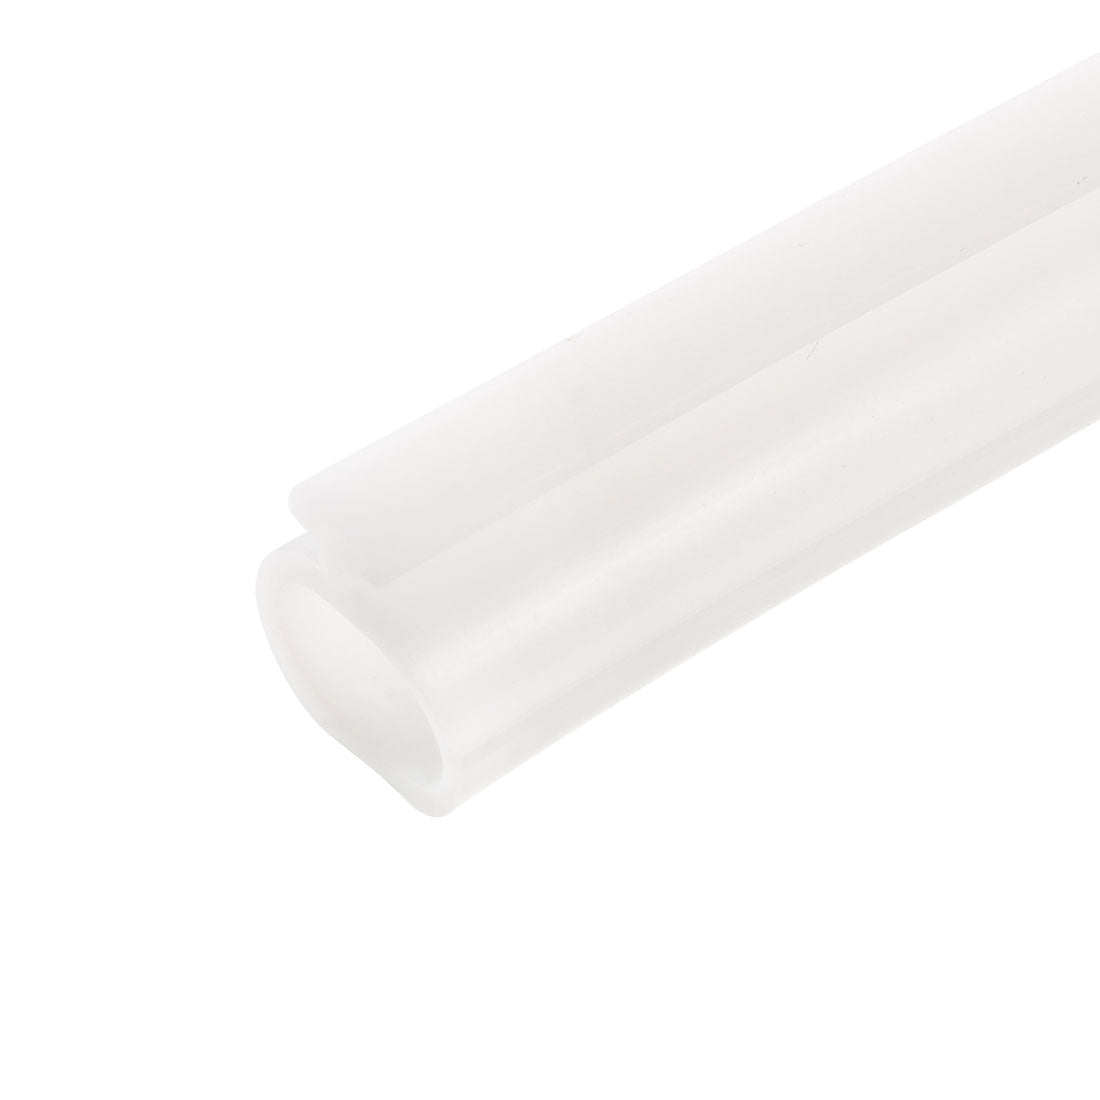 uxcell Uxcell T-Slot Mount Weatherstrip Seal 9mm Bulb Bubble for 5mm Slot 3 Meters White